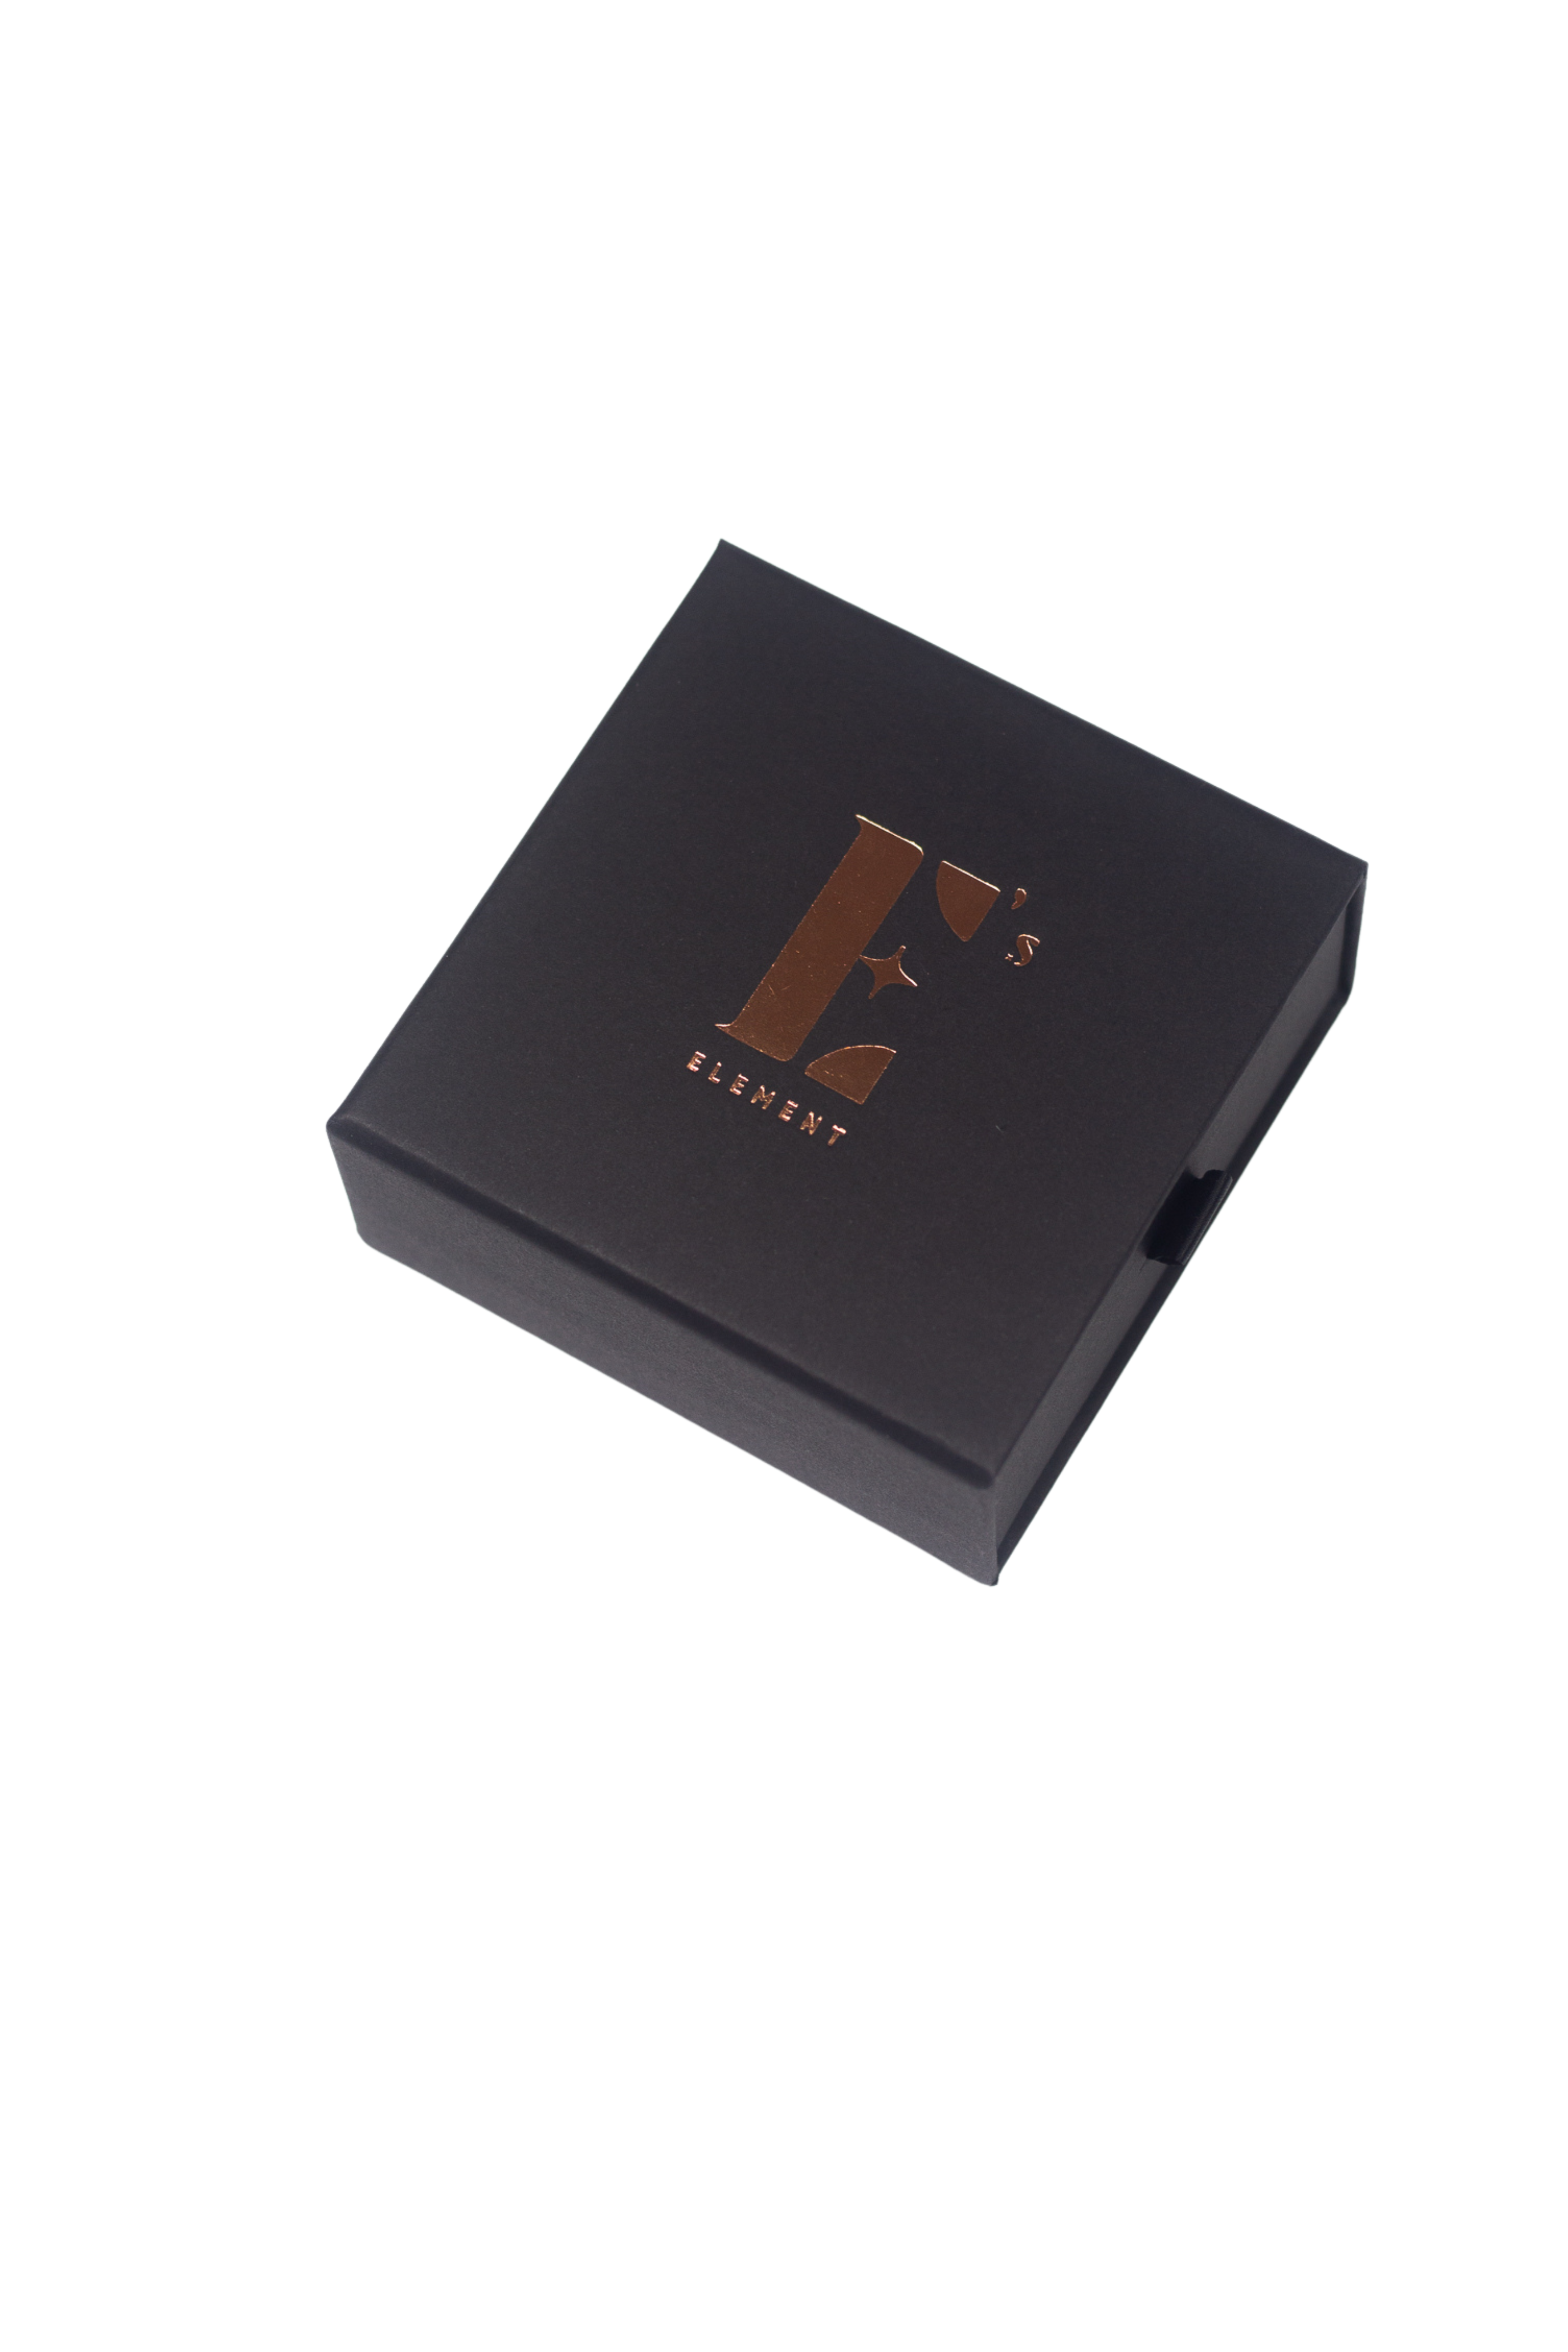 Black cap for a box with the E's Element logo imprinted in gold. Gift Box (Add-On) by E's Element.